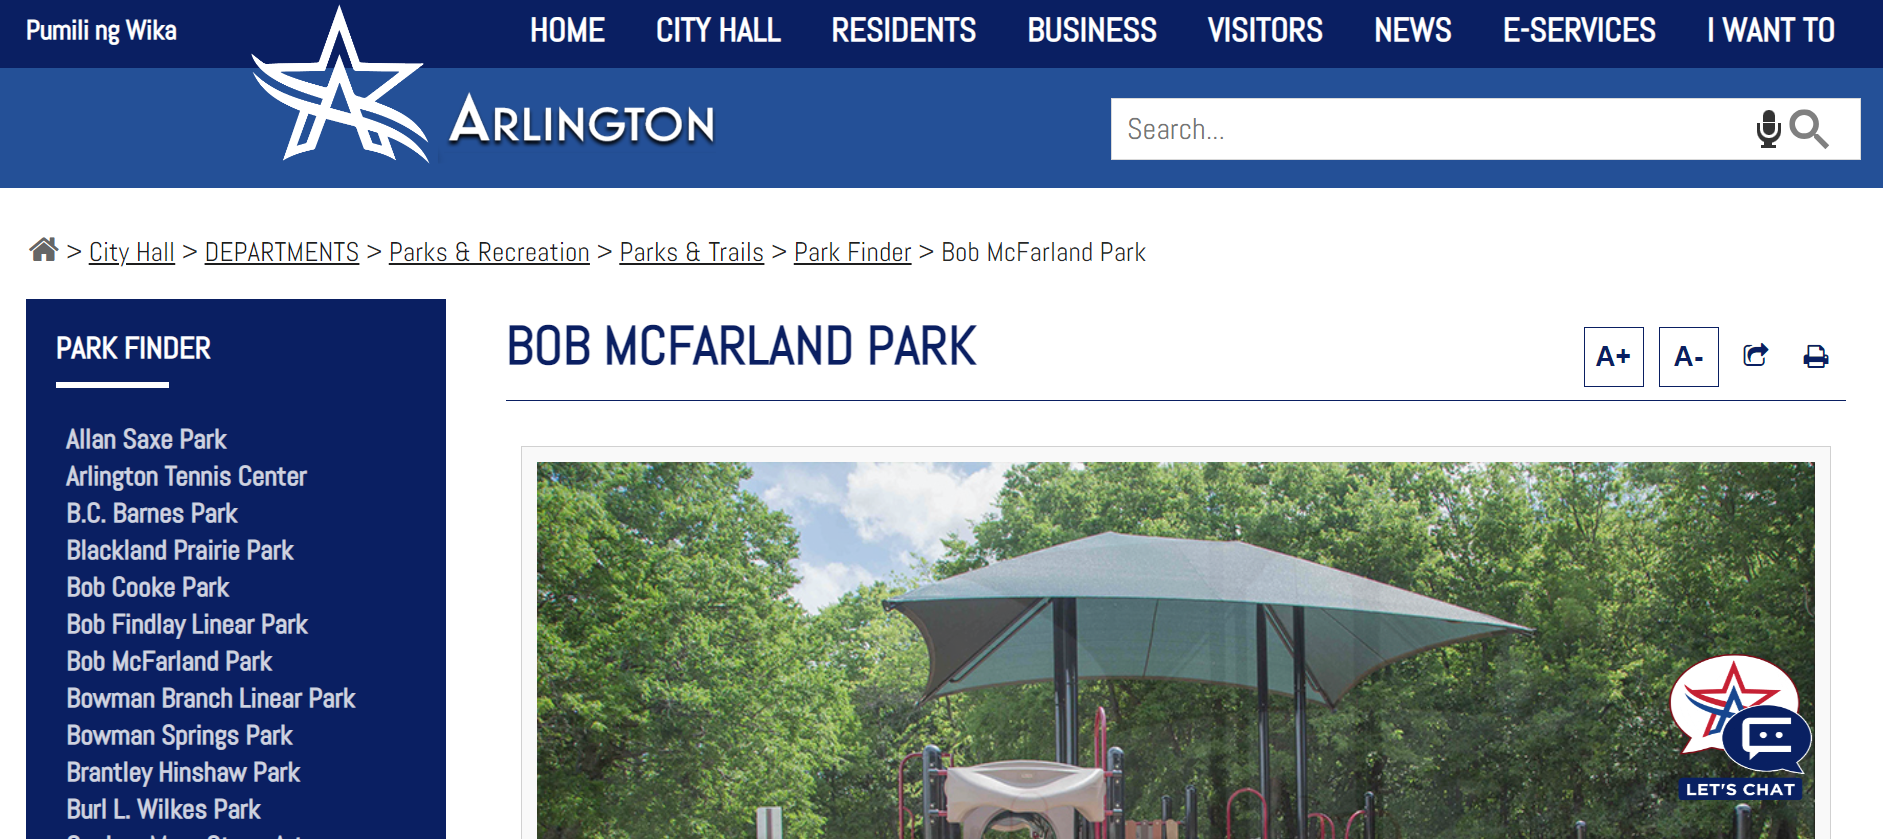 One of the best Parks in Arlington